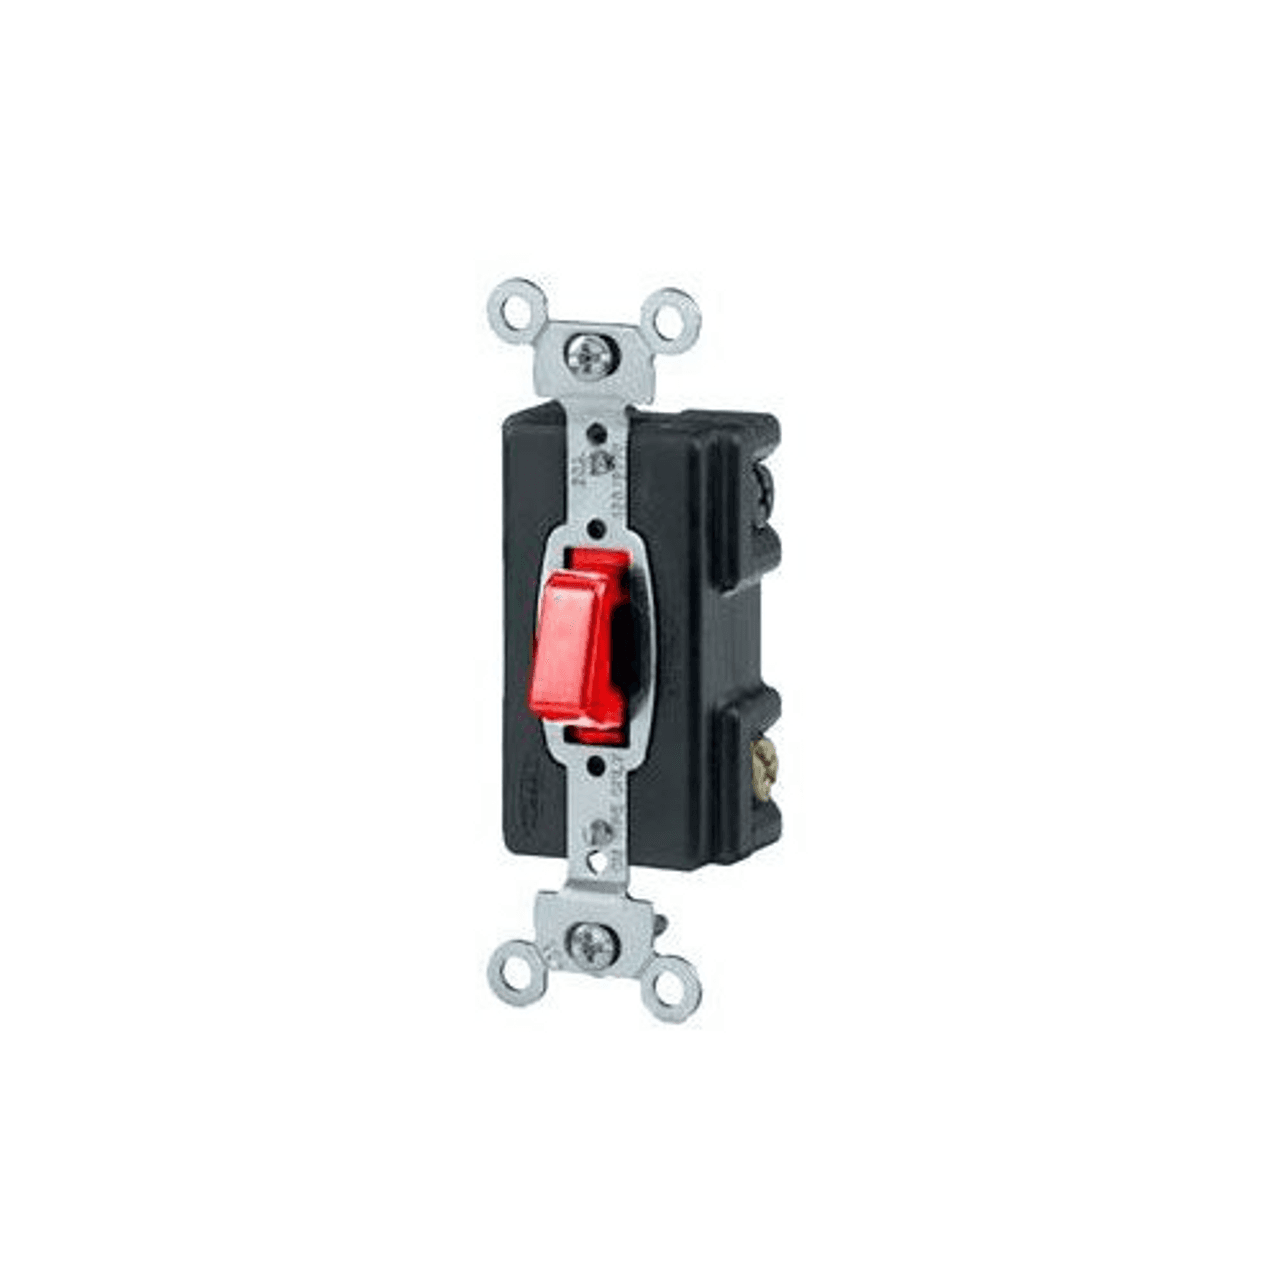 Hubbell HBL1297 Switches and Lighting Controls, Industrial Grade, PresSwitch, General Purpose AC, Single Pole, 20A 120/277V AC, Screw Terminals, Red  ; Large brass binding head screws with deep slots ; Thread cleaning captive mounting screw ; Strip gauge for accurate wir